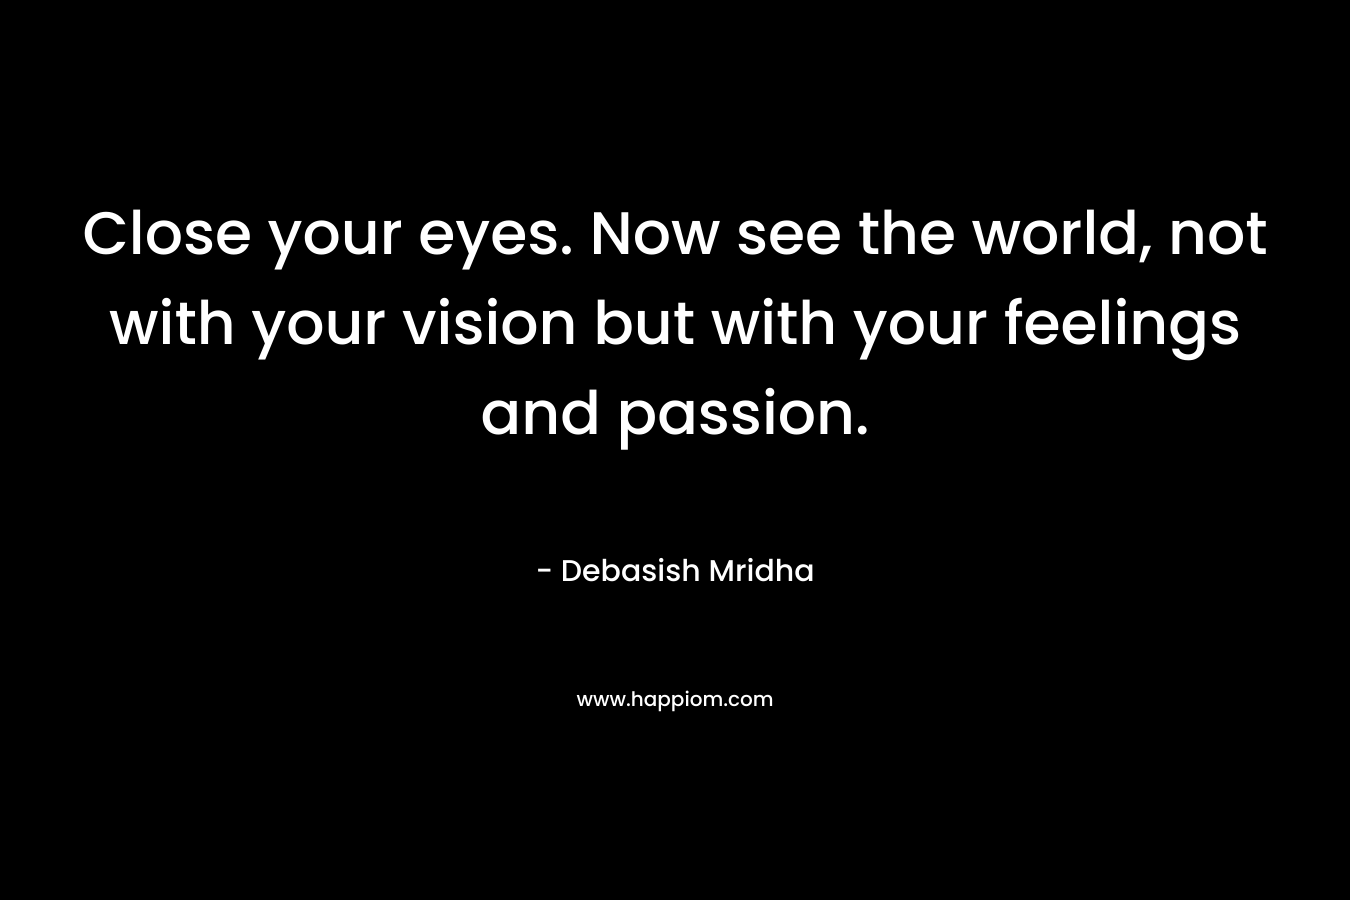 Close your eyes. Now see the world, not with your vision but with your feelings and passion.